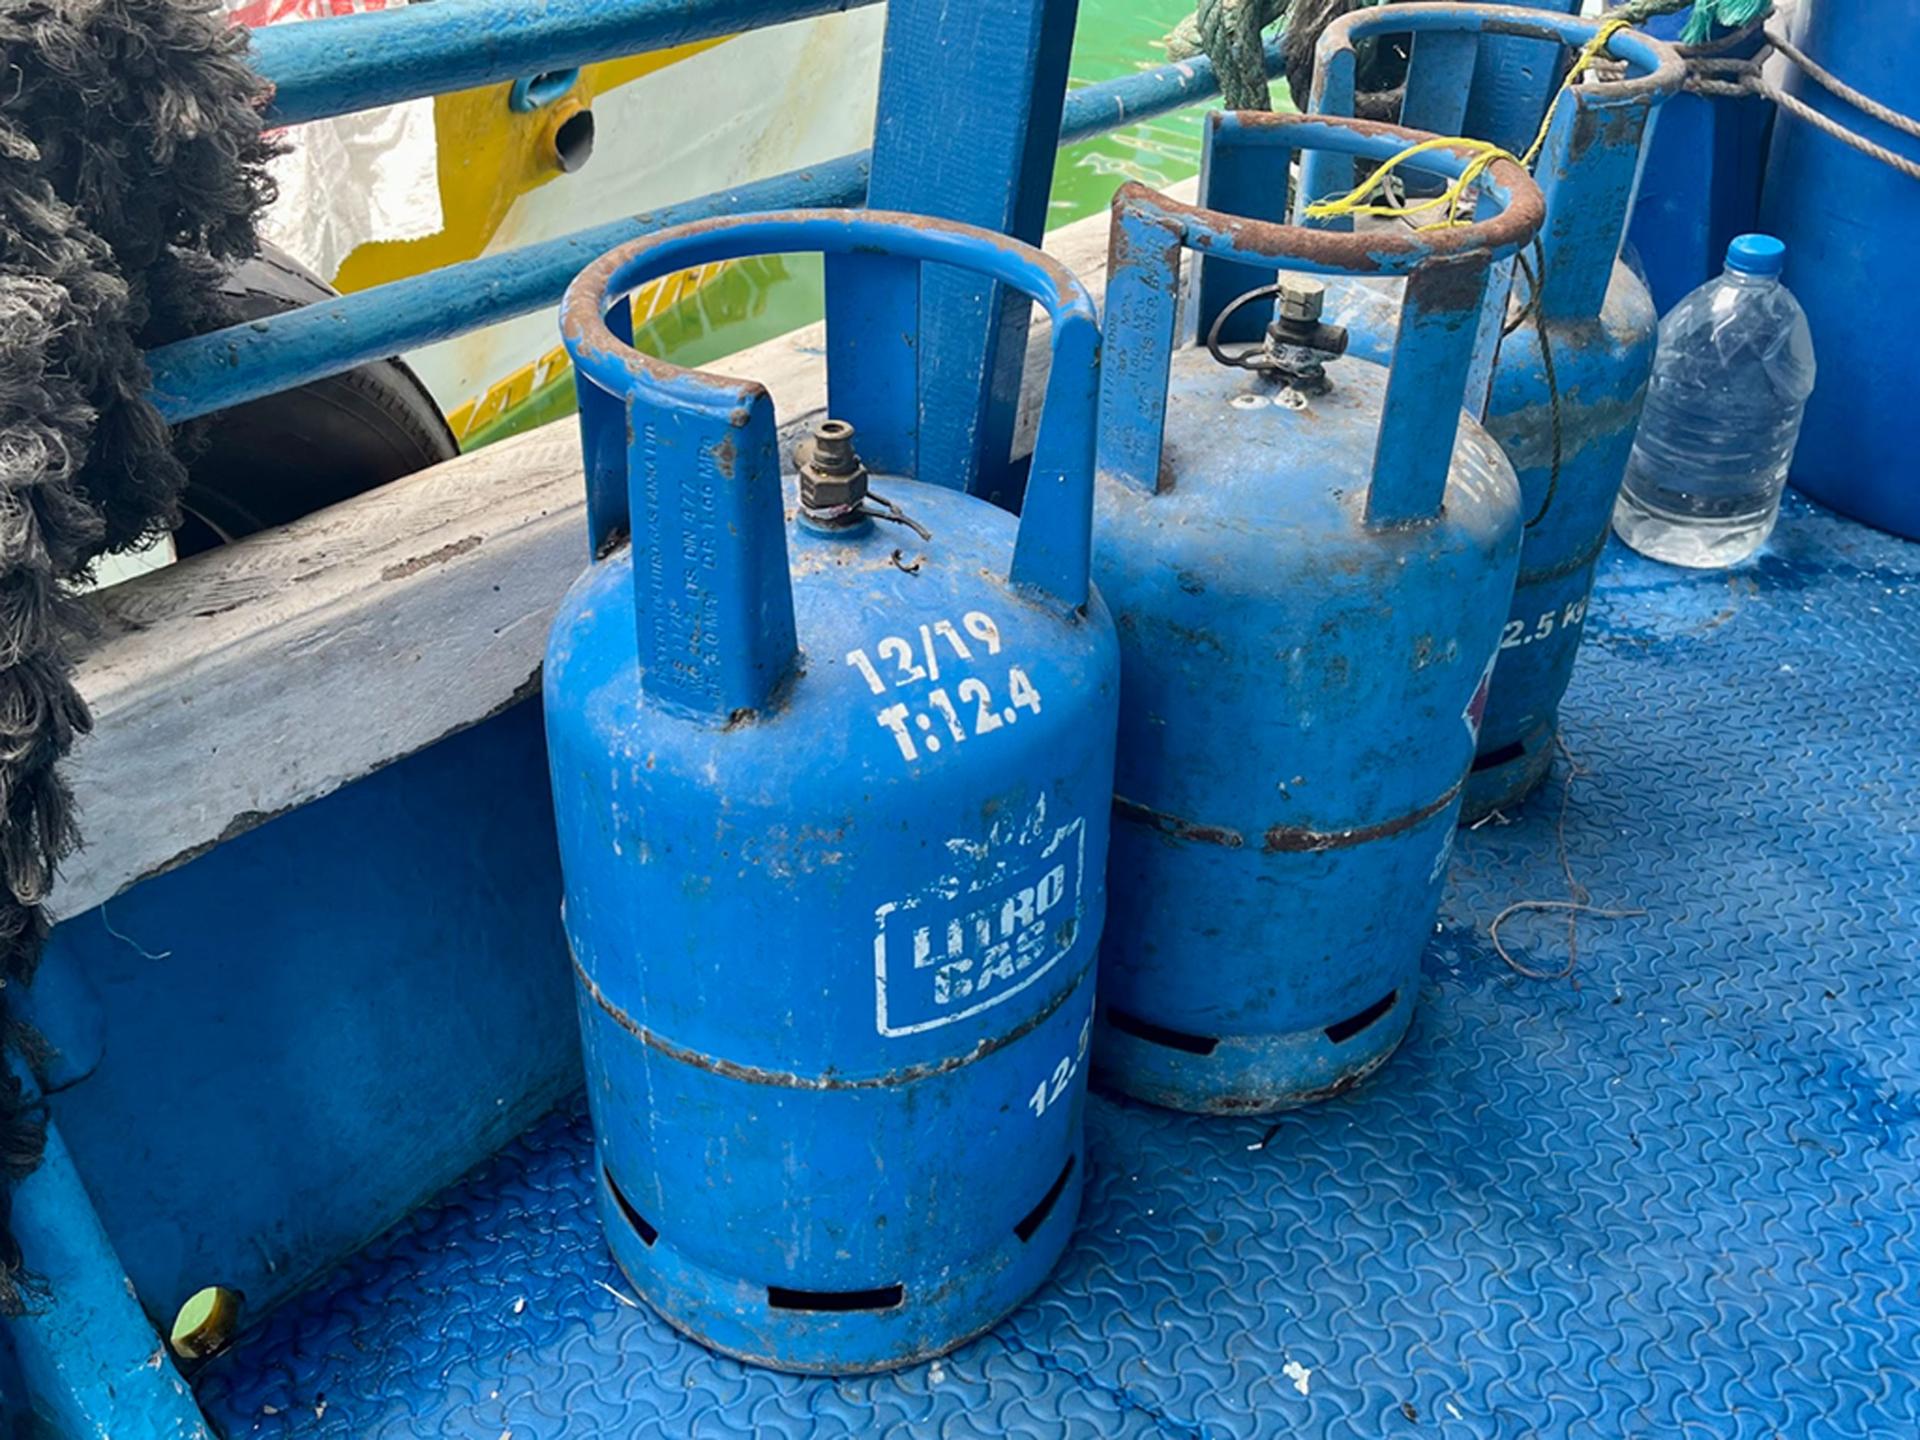 Boat captain Saman Indica fears cooking gas, also in short supply in Sri Lanka, could be a target for thieves.